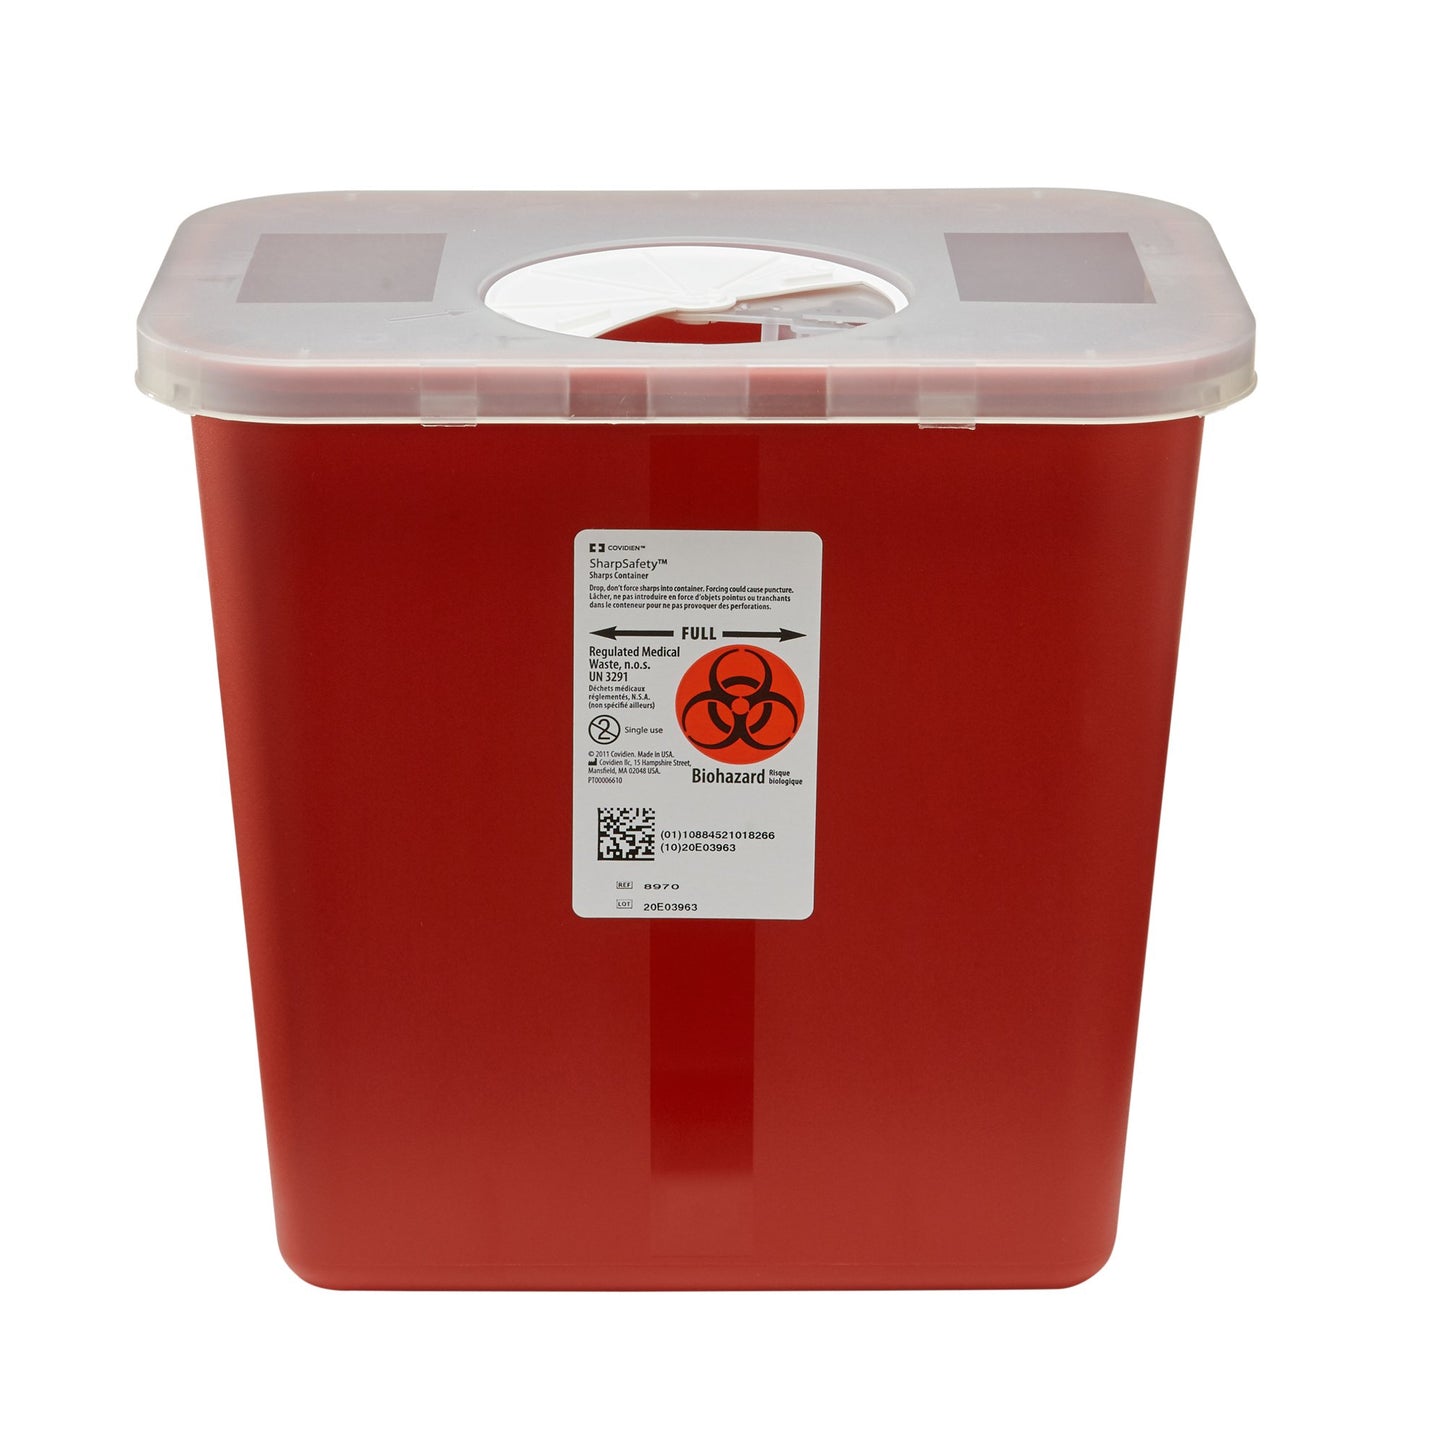 Cardinal Sharps Container SharpSafety Red Base 10 H X 10-1/2 W X 7-1/4 D Inch